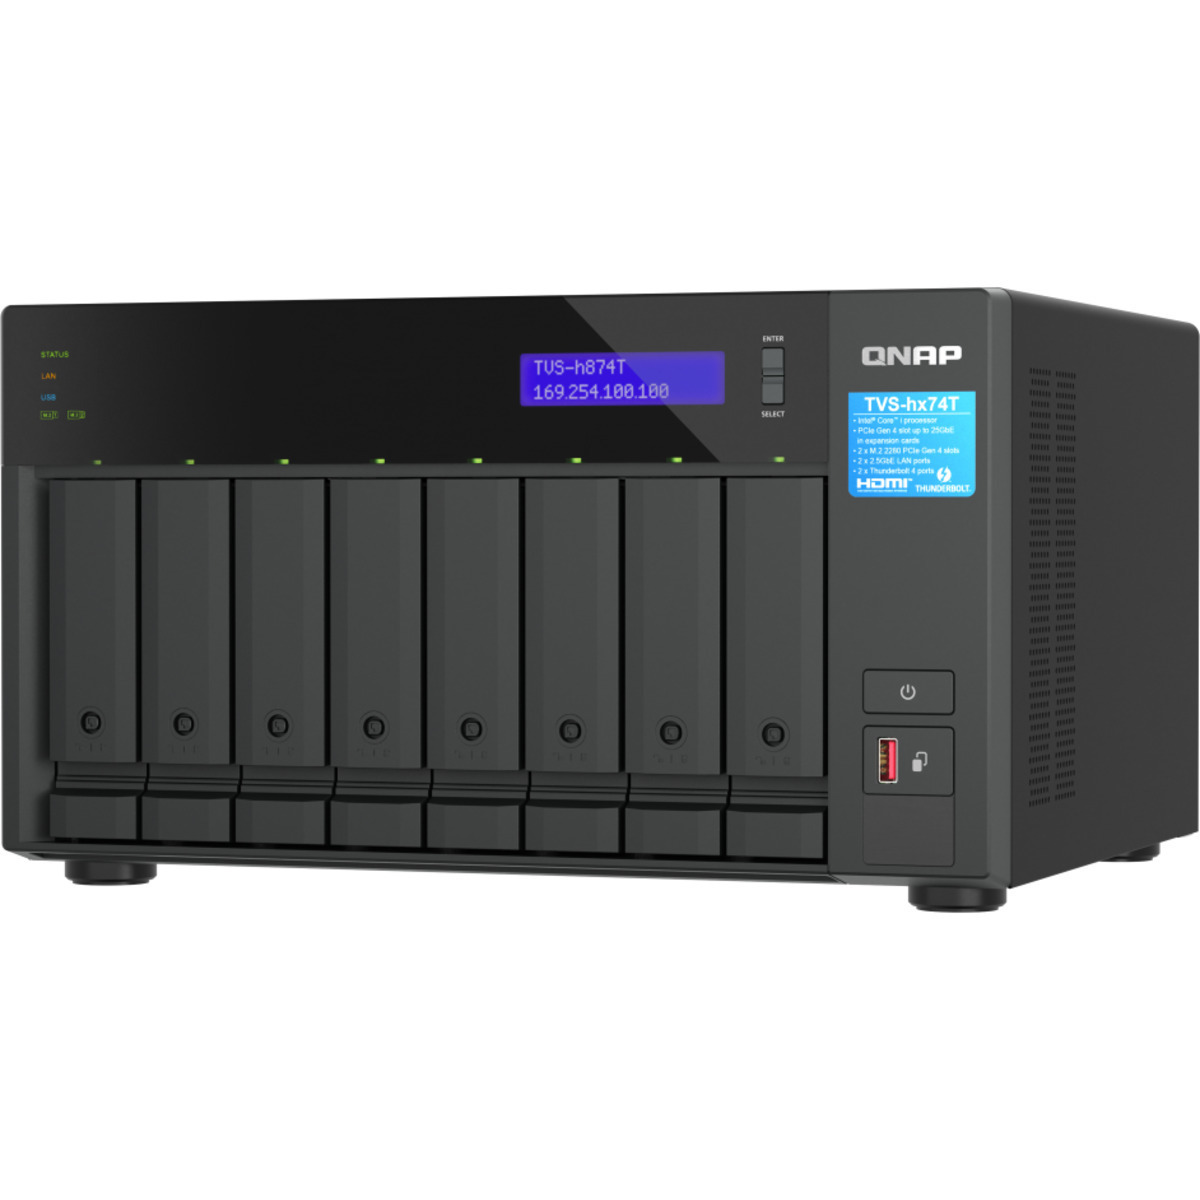 QNAP TVS-h874T Core i7 Thunderbolt 4 144tb 8-Bay Desktop Multimedia / Power User / Business DAS-NAS - Combo Direct + Network Storage Device 8x18tb Seagate IronWolf Pro ST18000NT001 3.5 7200rpm SATA 6Gb/s HDD NAS Class Drives Installed - Burn-In Tested TVS-h874T Core i7 Thunderbolt 4